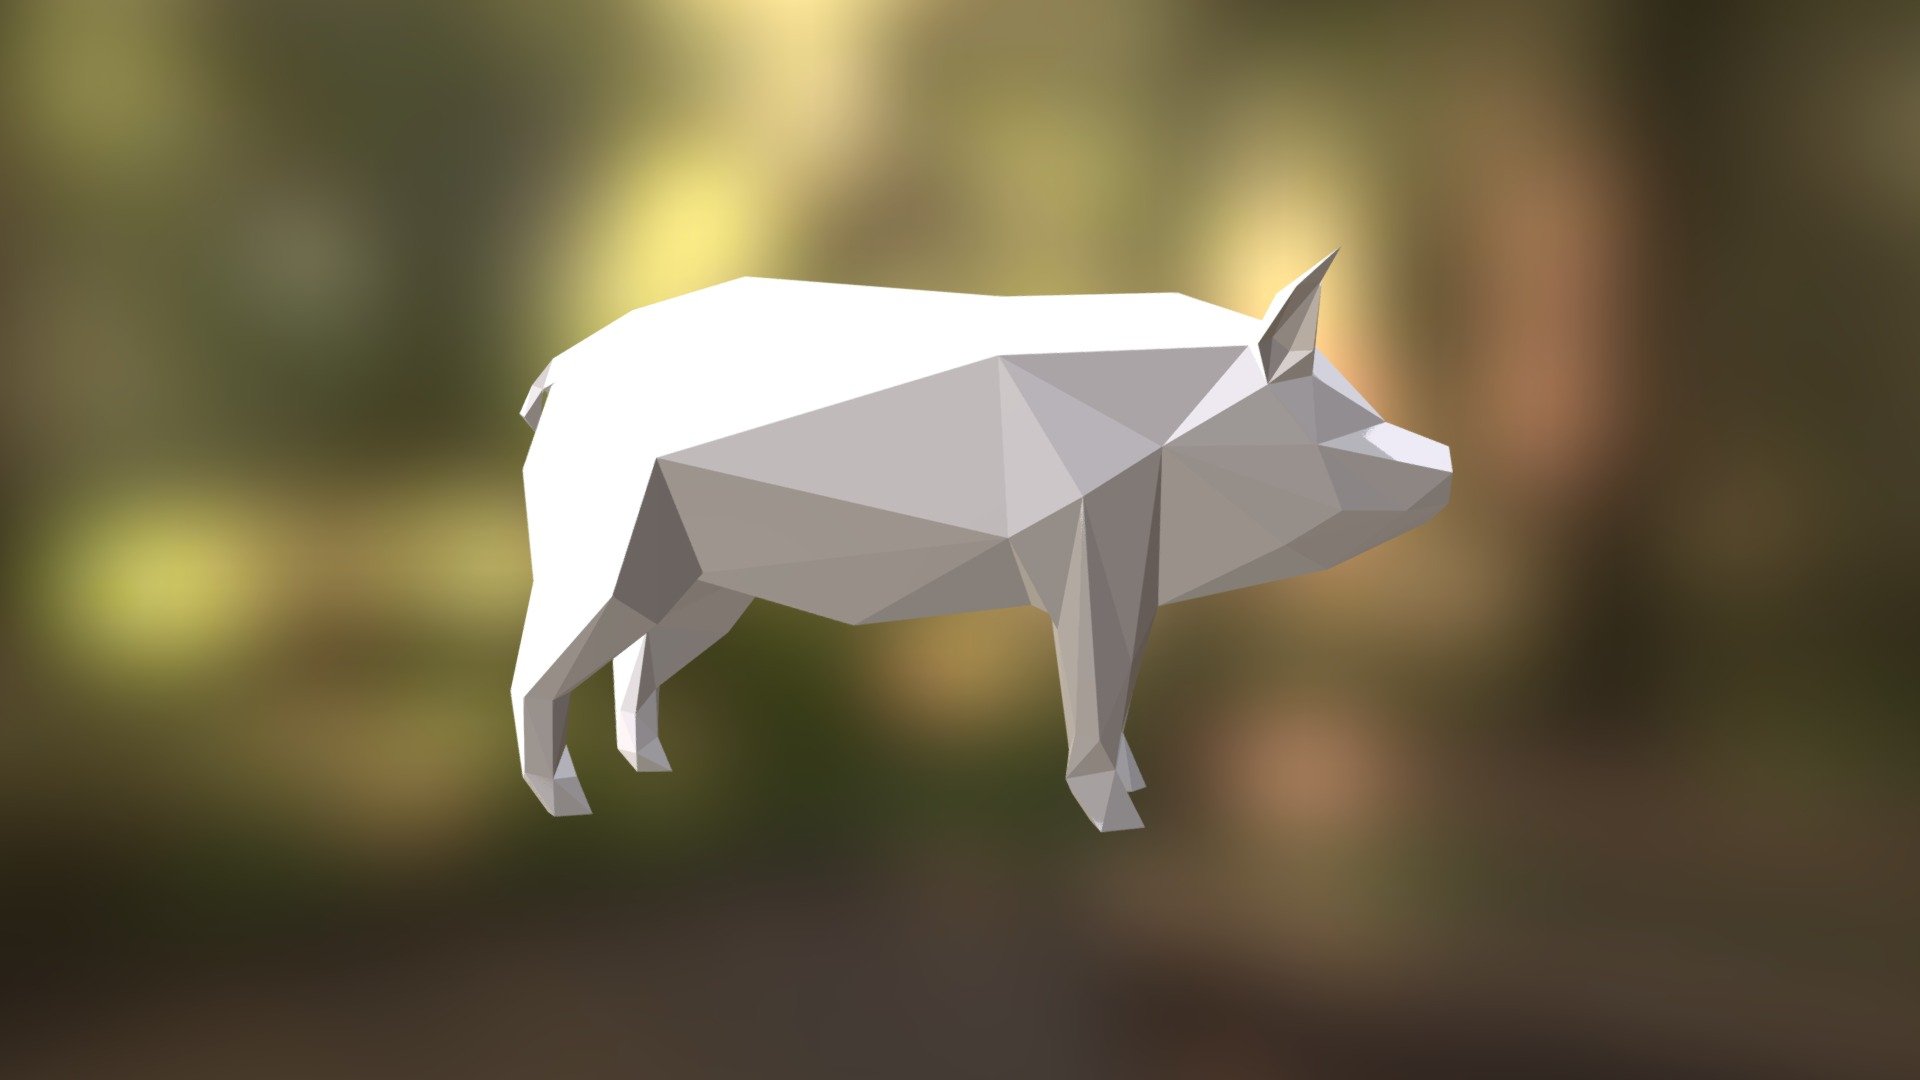 Low Poly 3D model for 3D printing. Pig Low Poly sculpture. You can find this model for 3D printing in my shop: -link removed- Reference model: http://www.cadnav.com - Pig low poly model for 3D printing - 3D model by Peolla3D 3d model